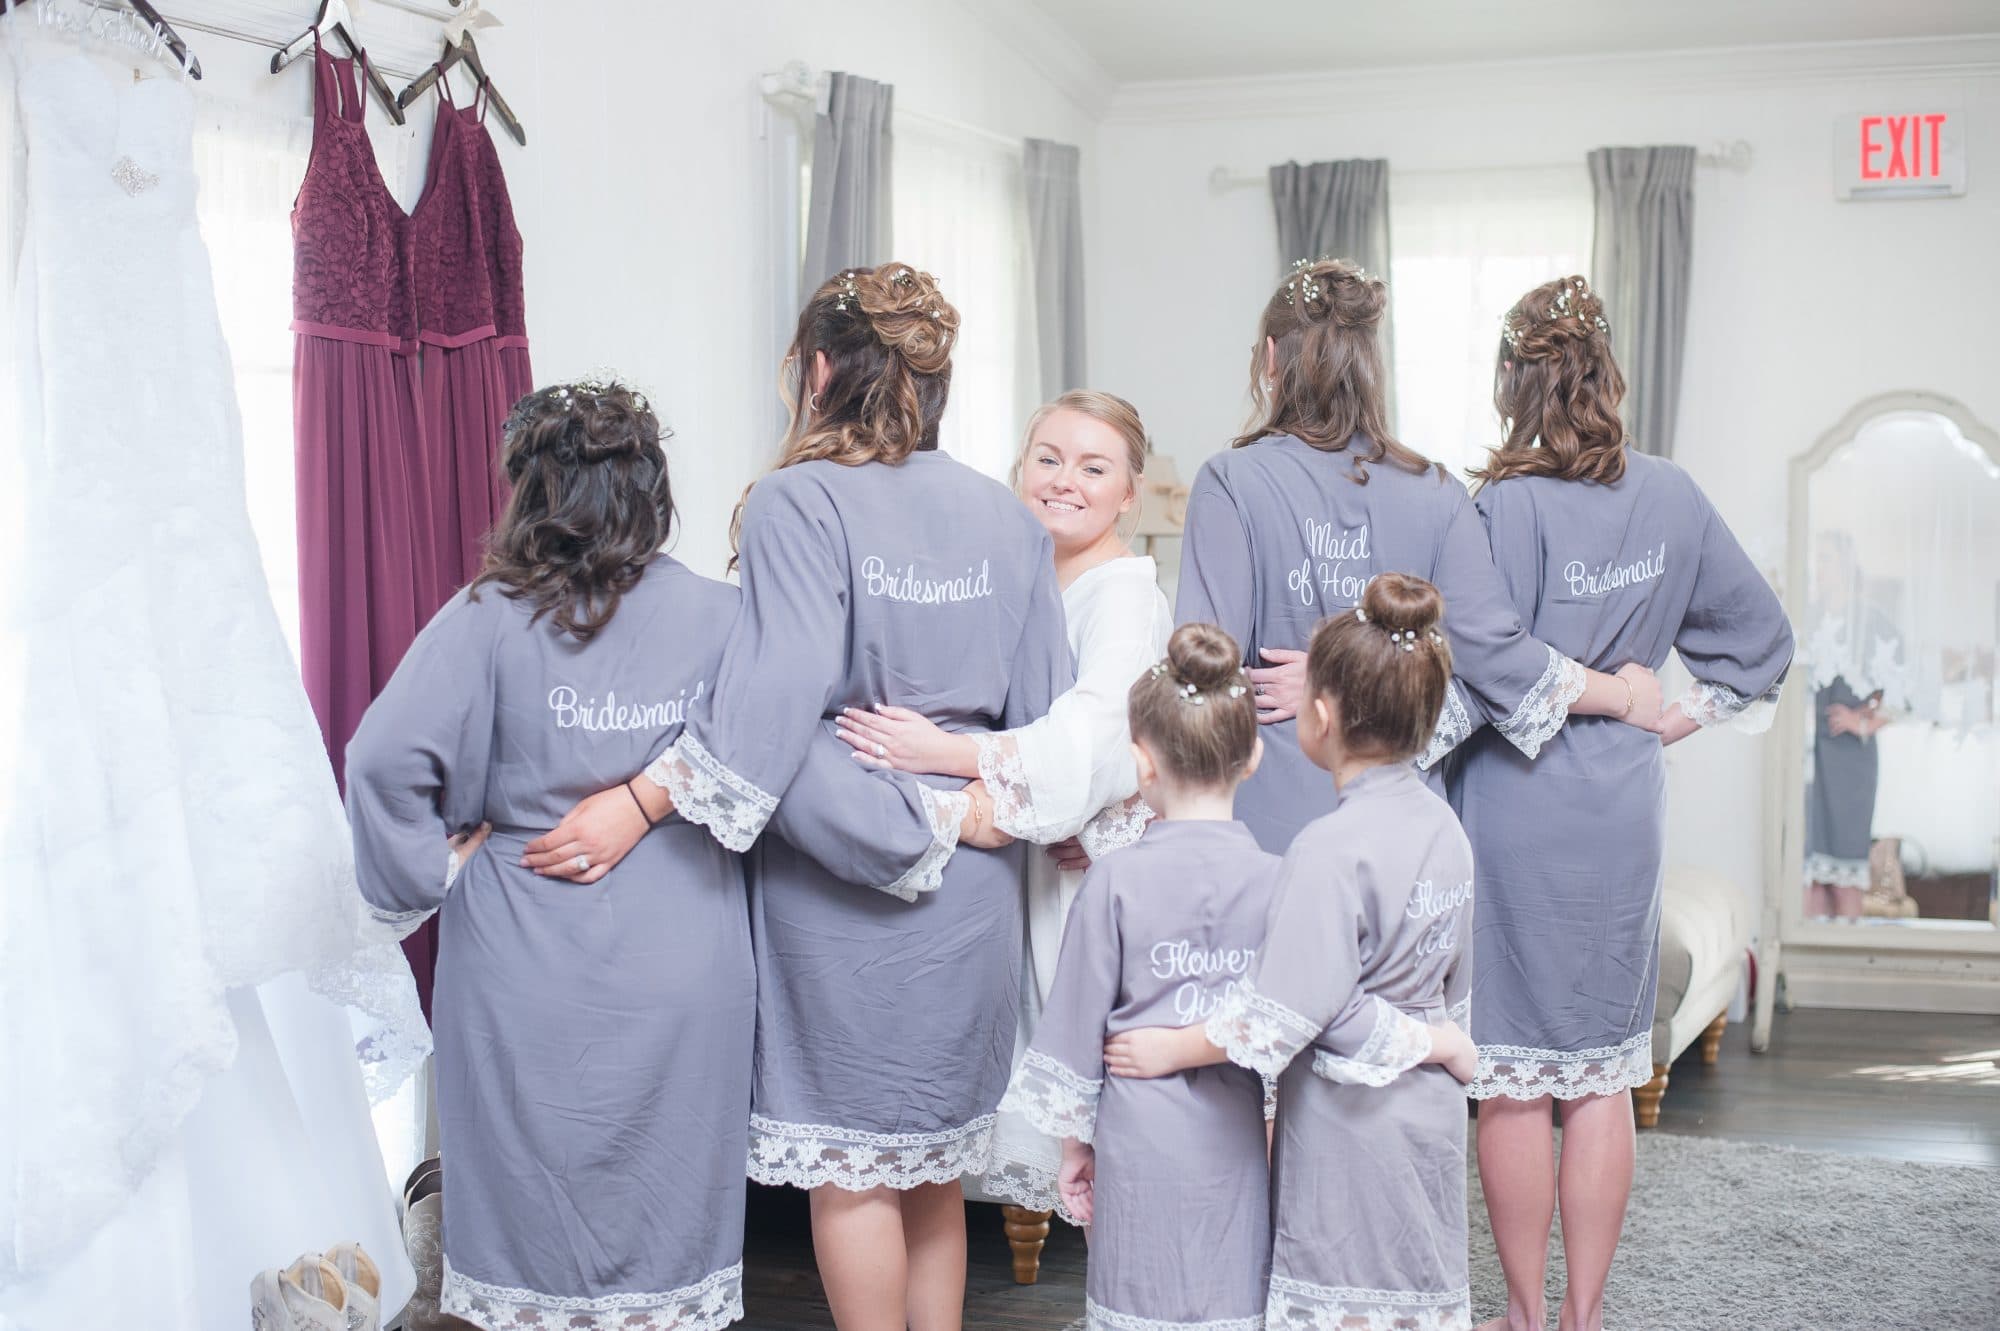 Bride, bridesmaids, and flower girls in matching robes.